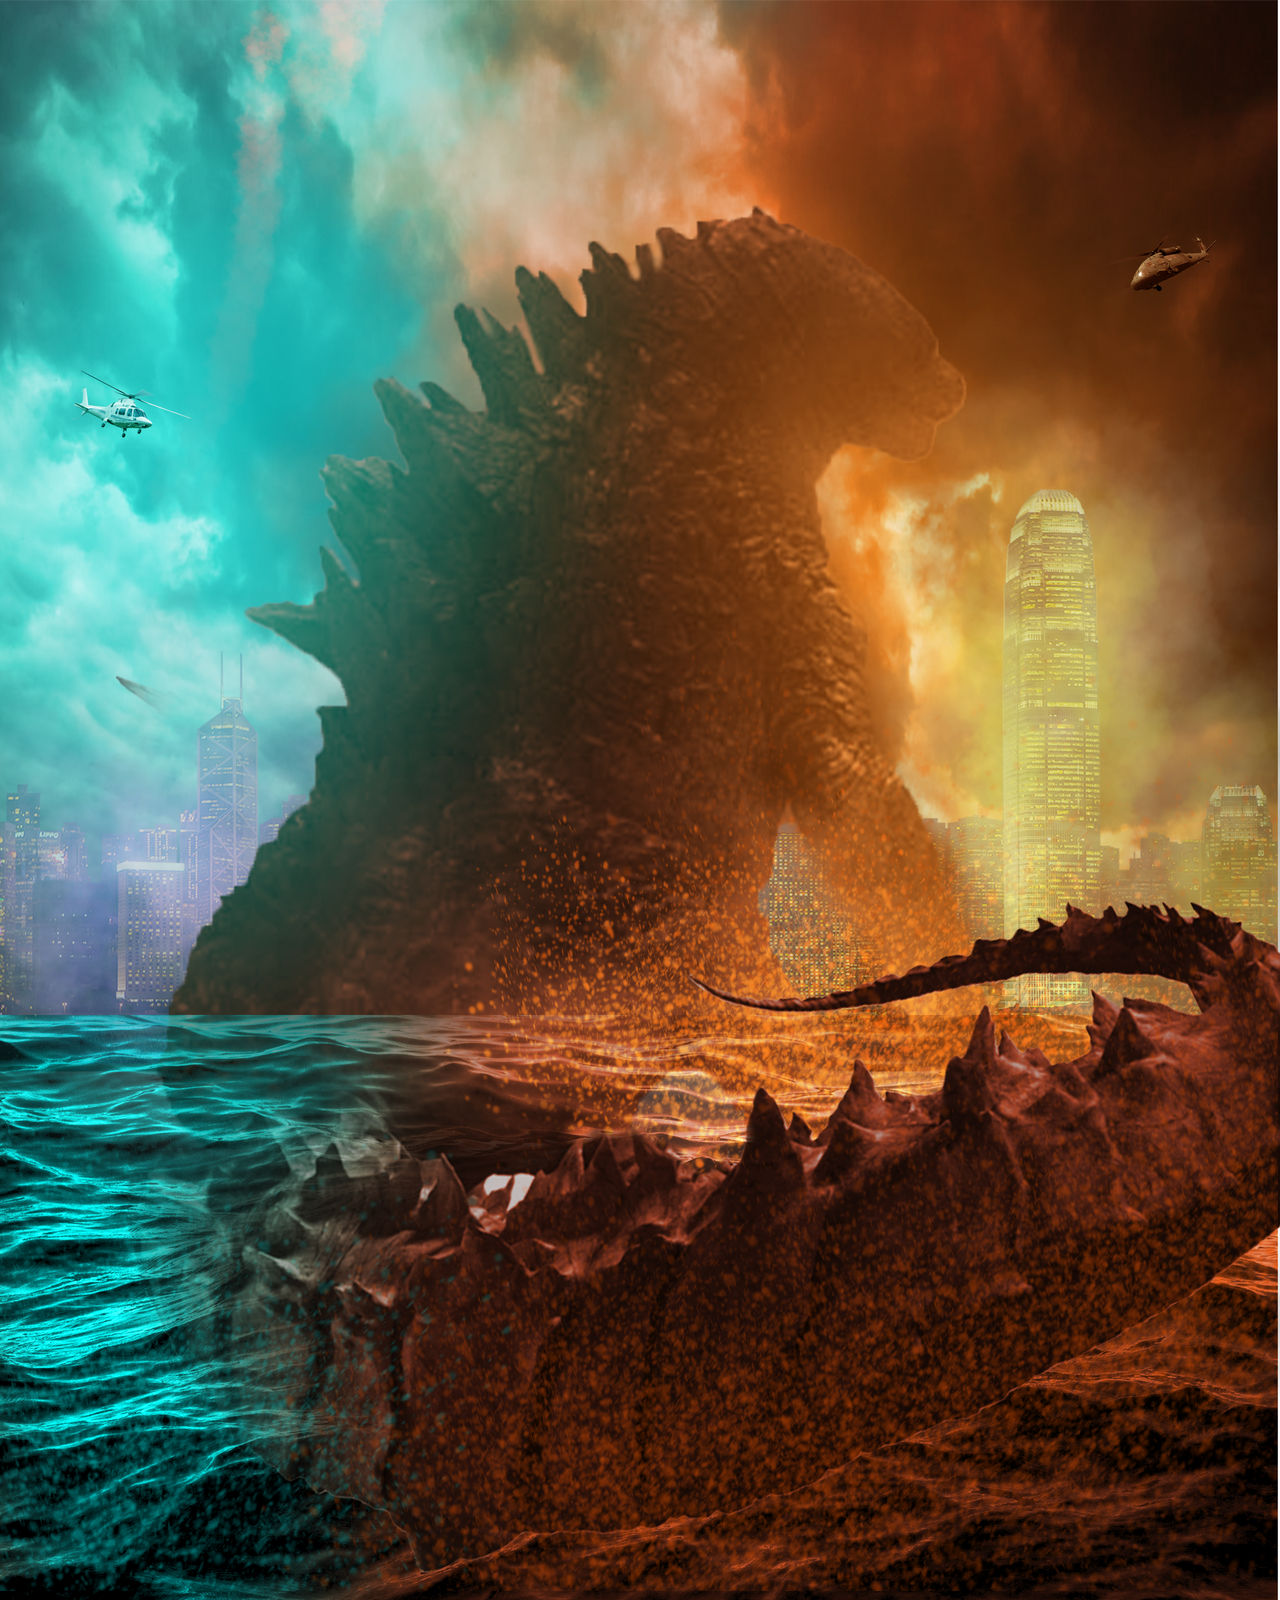 Godzilla Earth:The monster planet. By zb20021 by johnmc0007 on DeviantArt